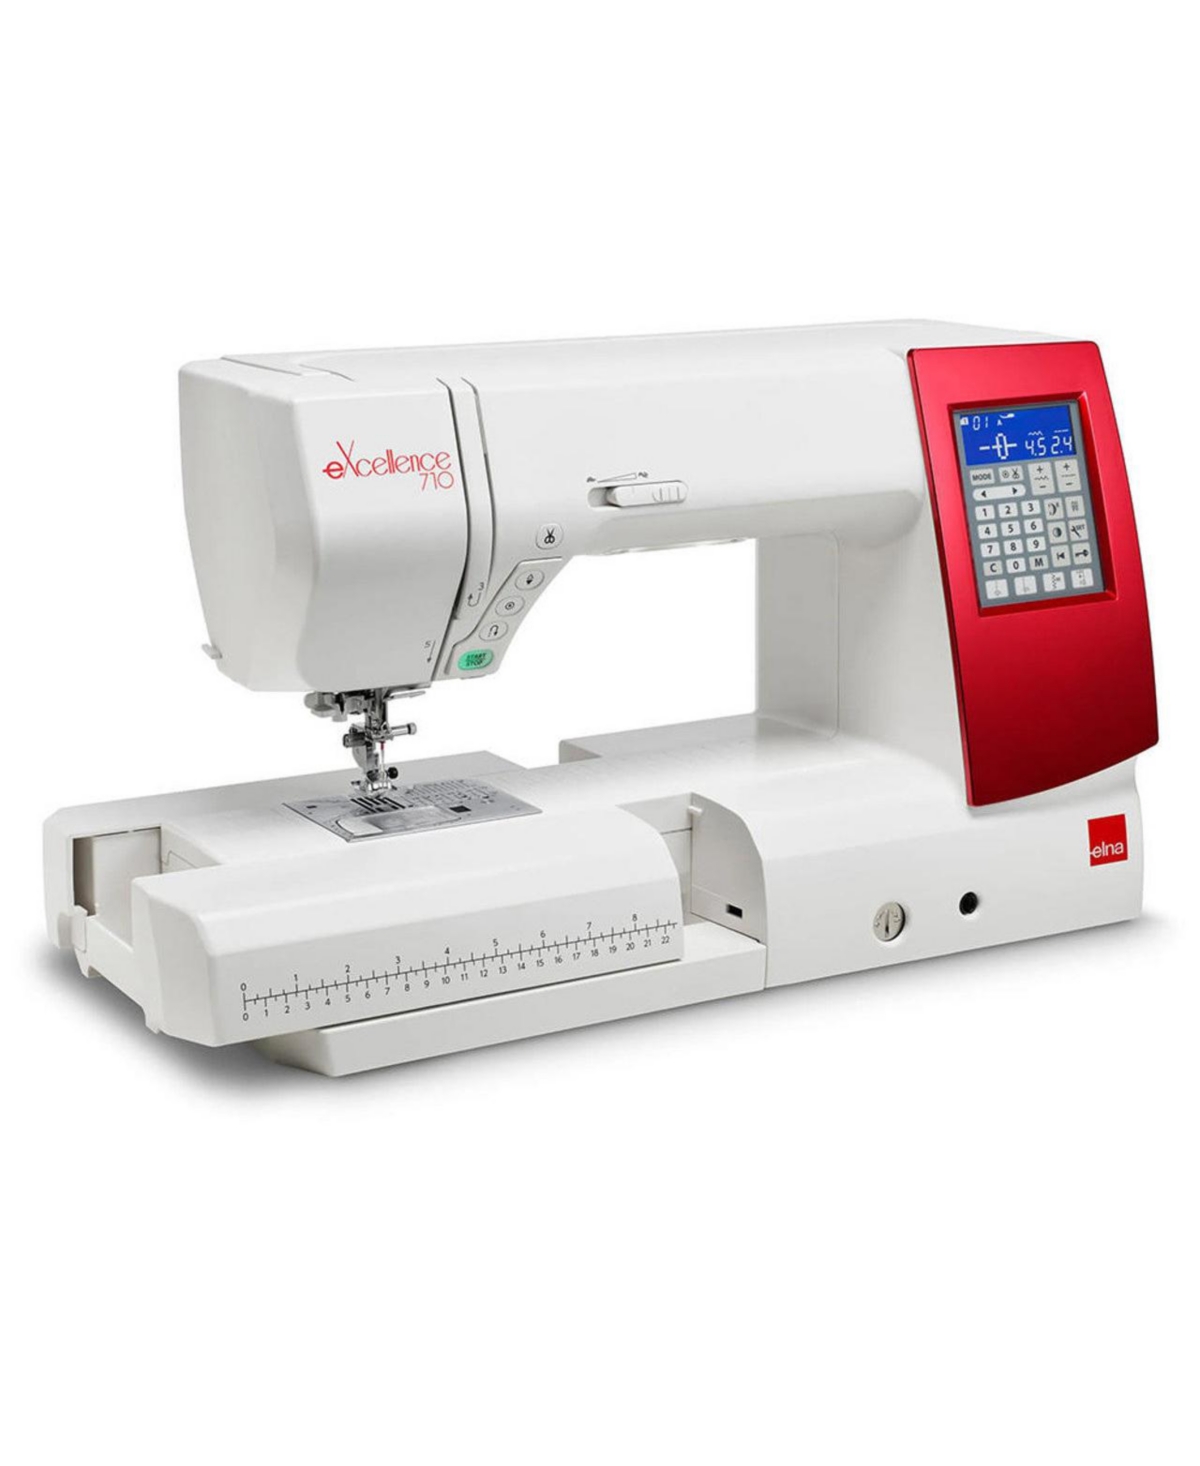 eXcellence 710 Sewing and Quilting Machine - White